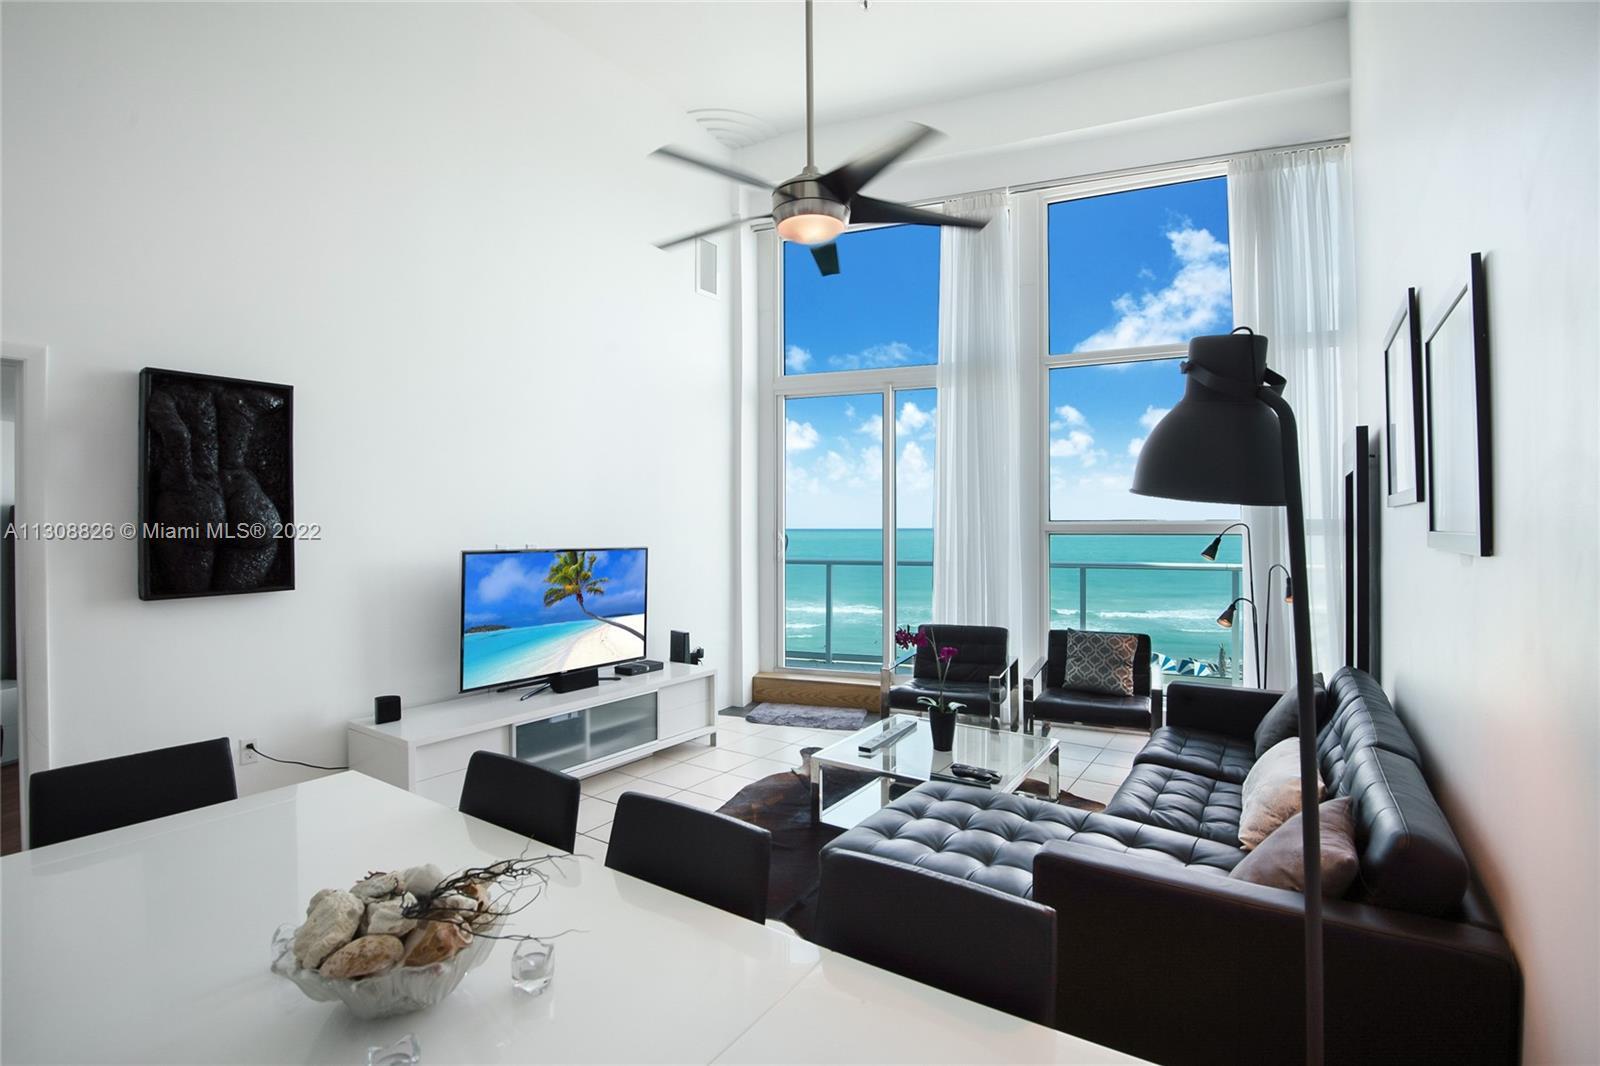 Amazing Ocean Views from every room in this two story 3 BR PH 1480sf. Fantastic Miami Beach location